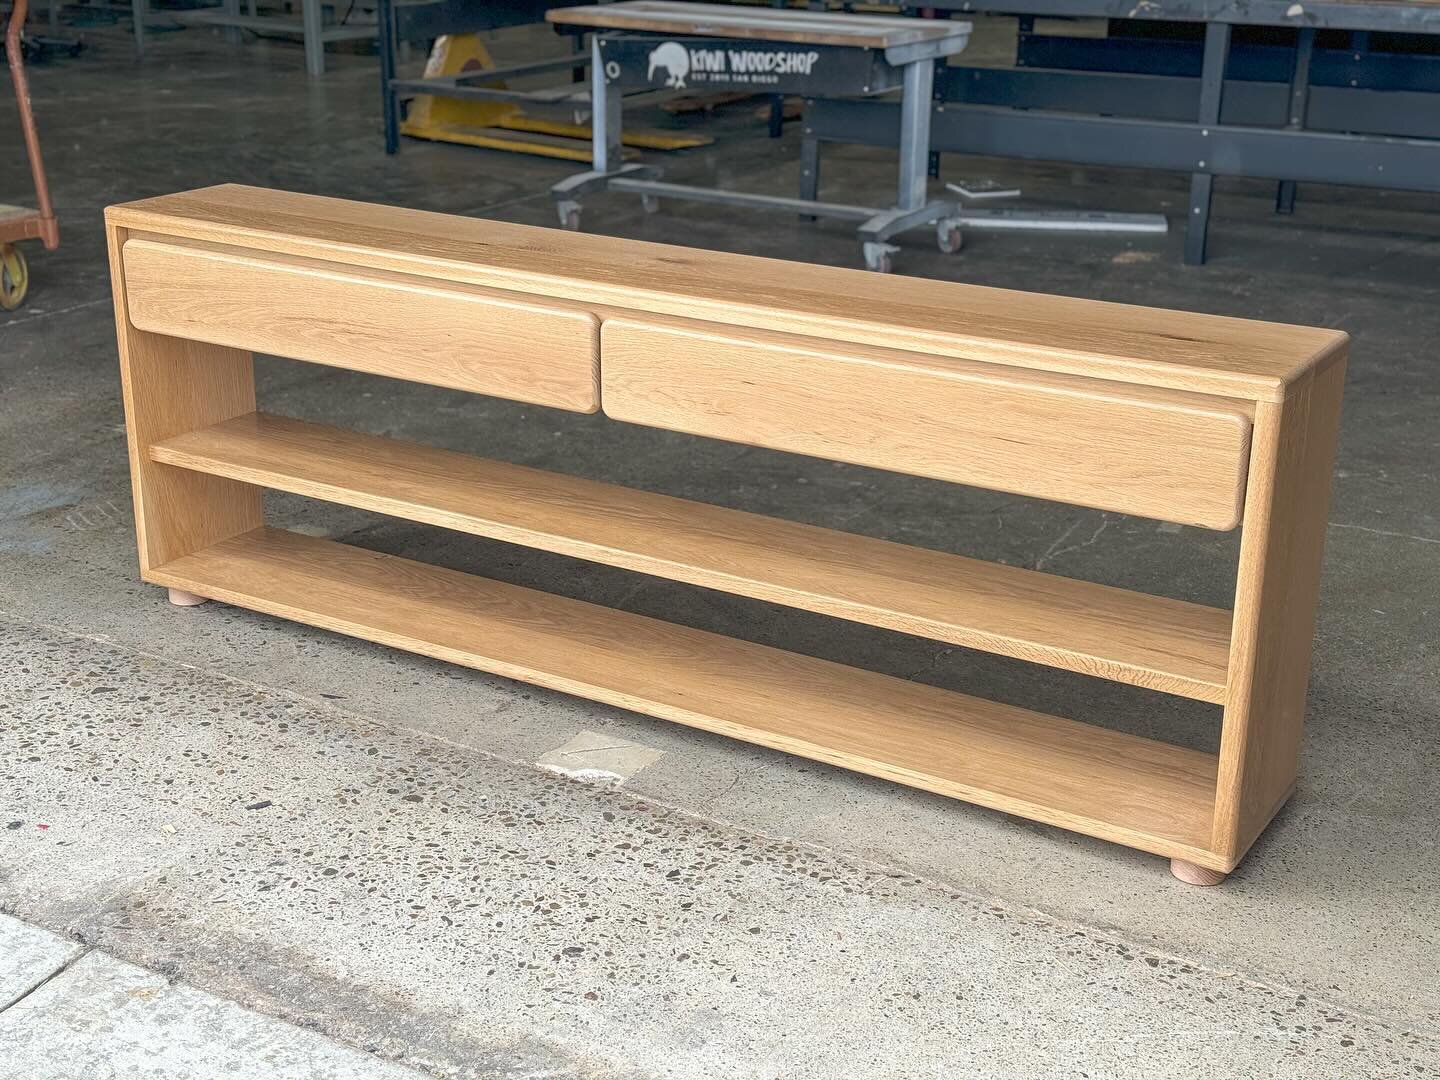 Always enjoy when we get to work on a new design.
This is our latest custom couch console.
Handcrafted with solid White Oak.
We added a large round over to soften the outside frame and drawer doors.
Dimensions- 80x12&rdquo; x30&rdquo;
&mdash;&mdash;&